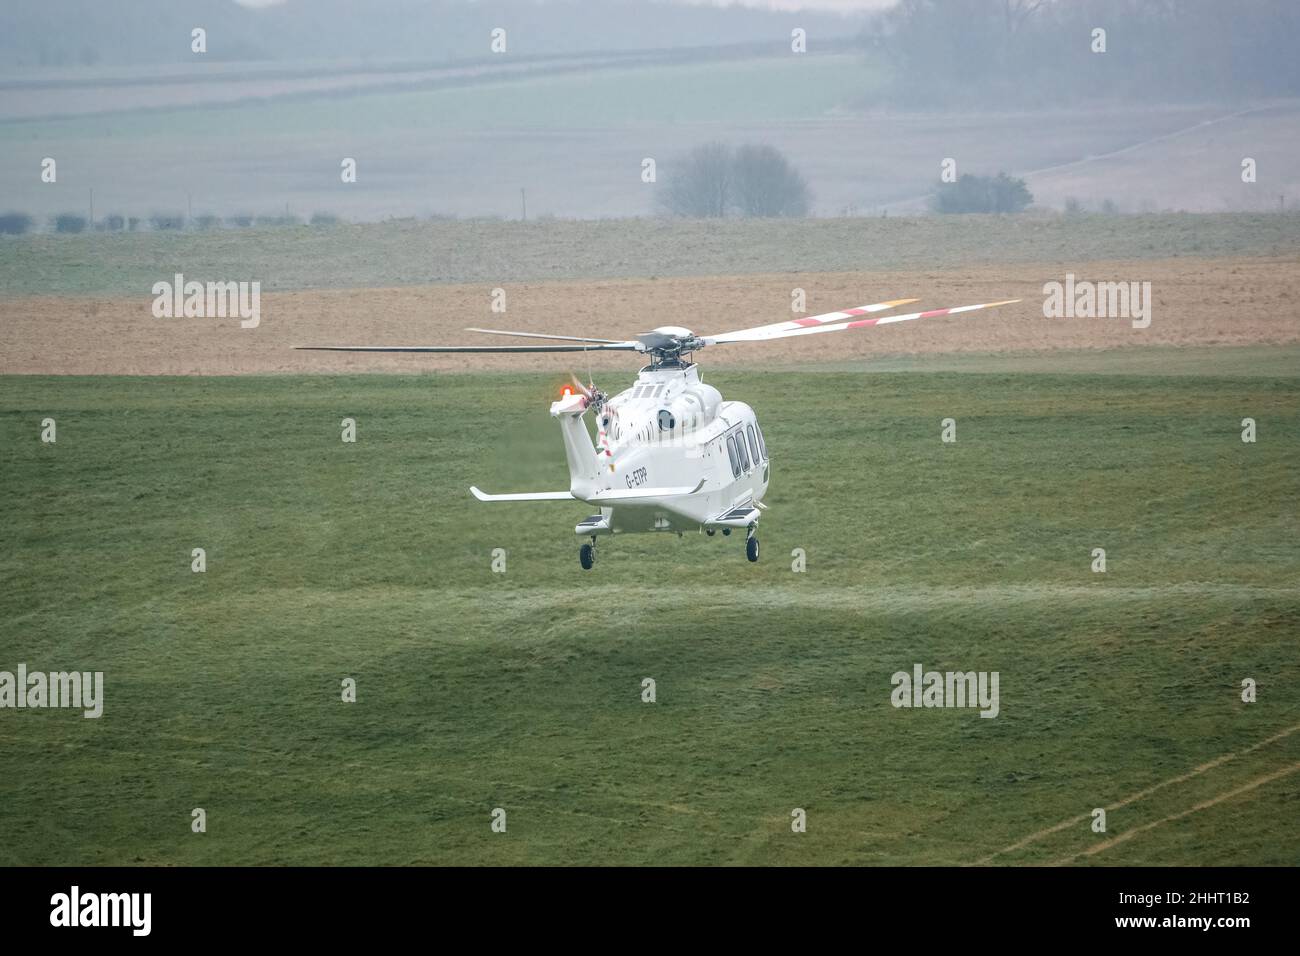 G-ETPP ETPS Agusta AW139 helicopter hovering just above grass on a military pilot training flight exercise, Wiltshire UK Stock Photo